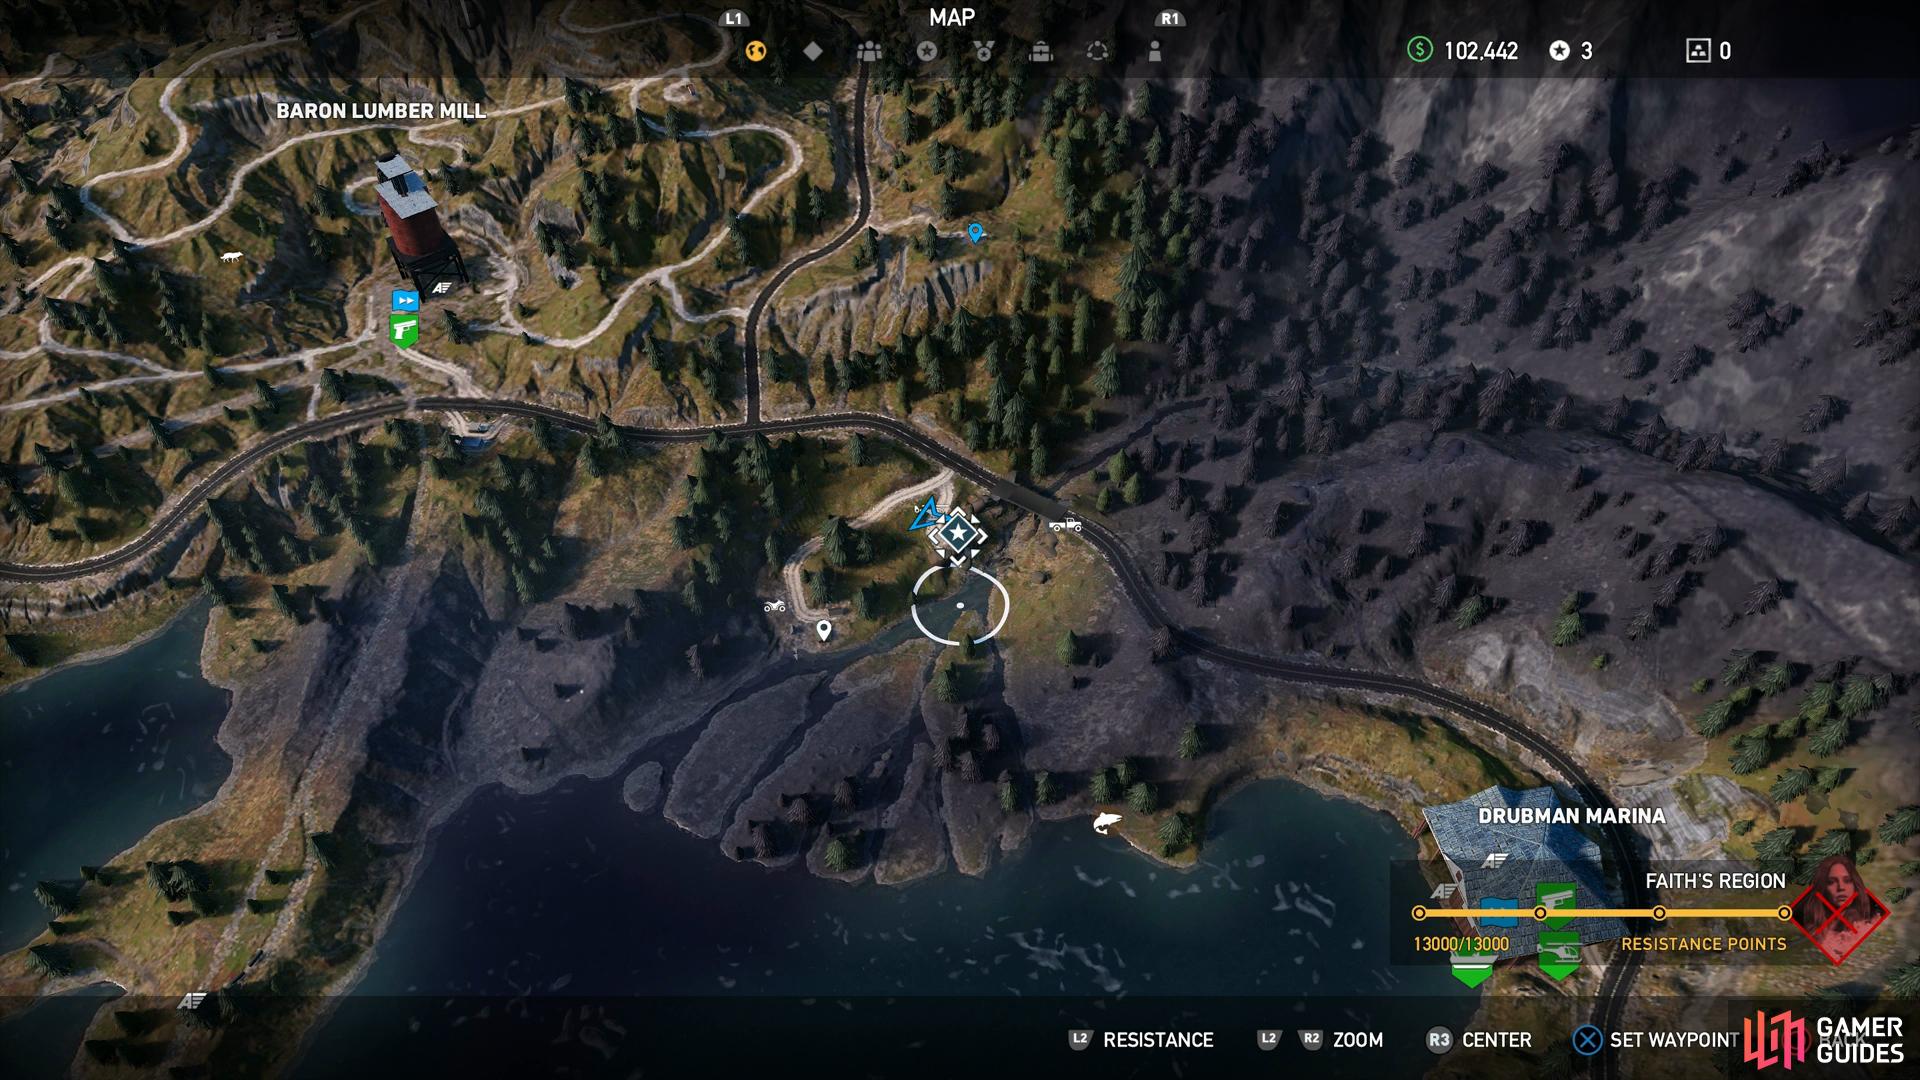 Godspeed Henbane River Side Missions Far Cry 5 Gamer Guides®